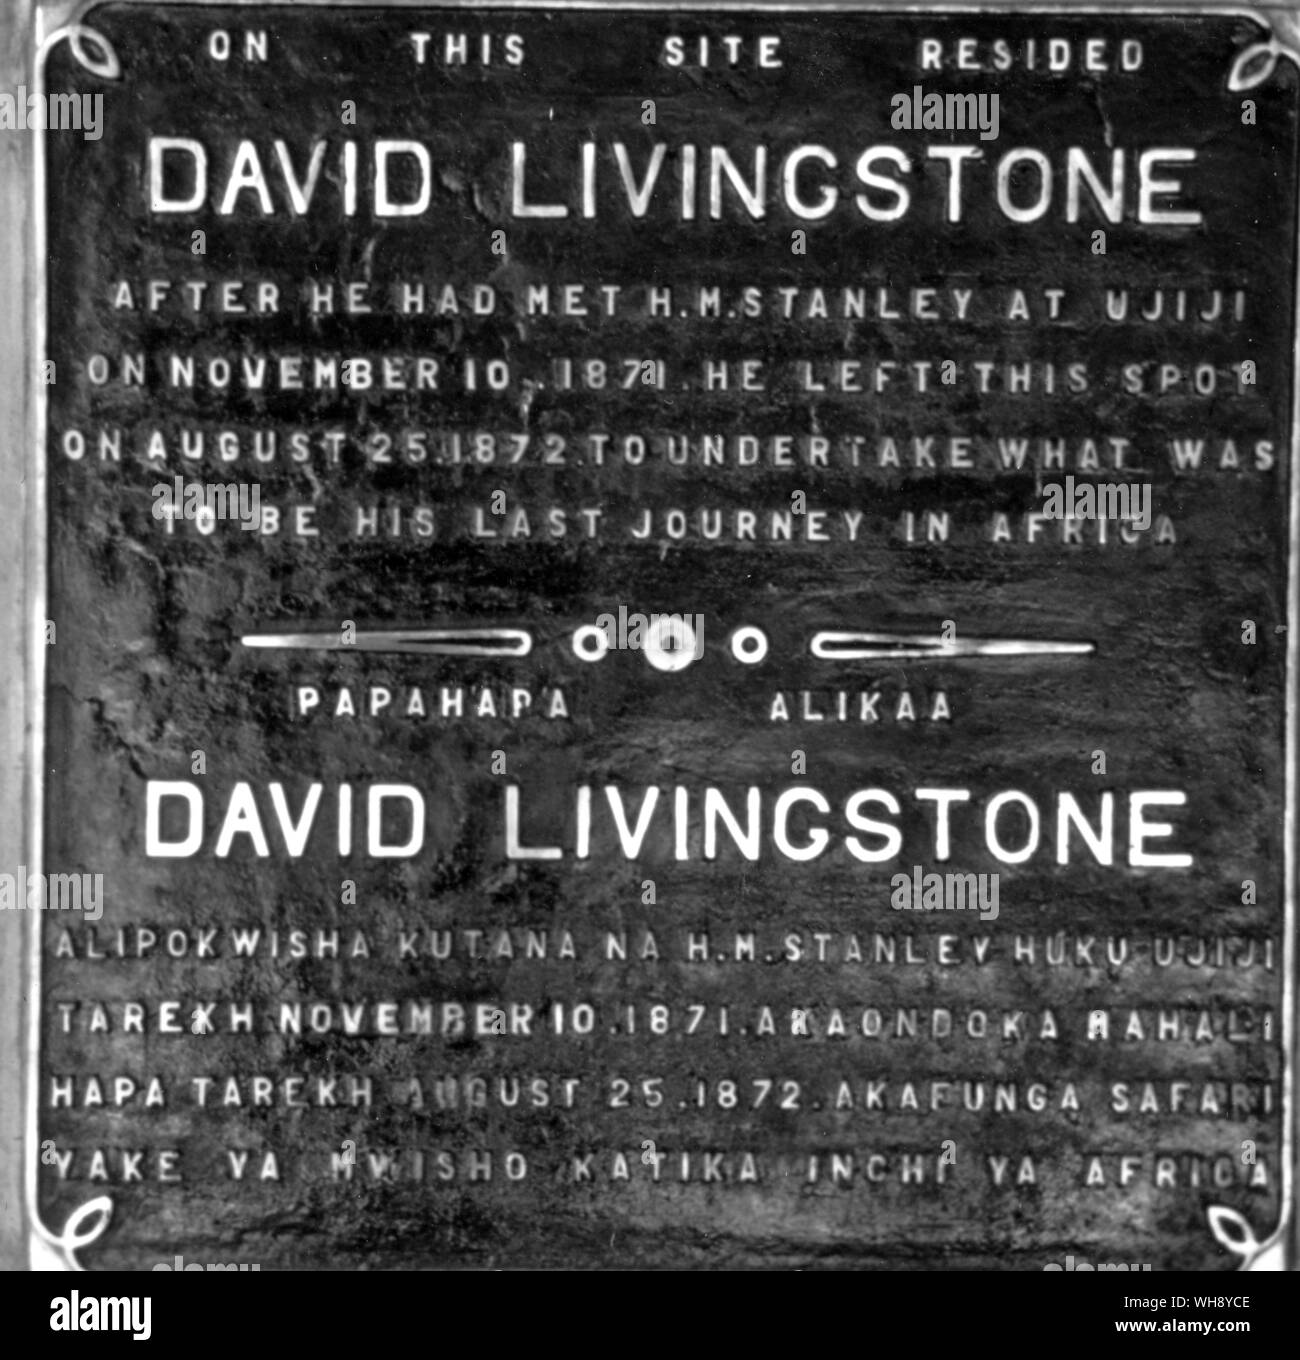 Two plaques marking Livingstone's parting from Stanley on March 14th, 1872, and the site of Livingstone's home after his meeting with Stanley until August 25th, 1872, on which date he set off on what was to be his last journey. Stock Photo